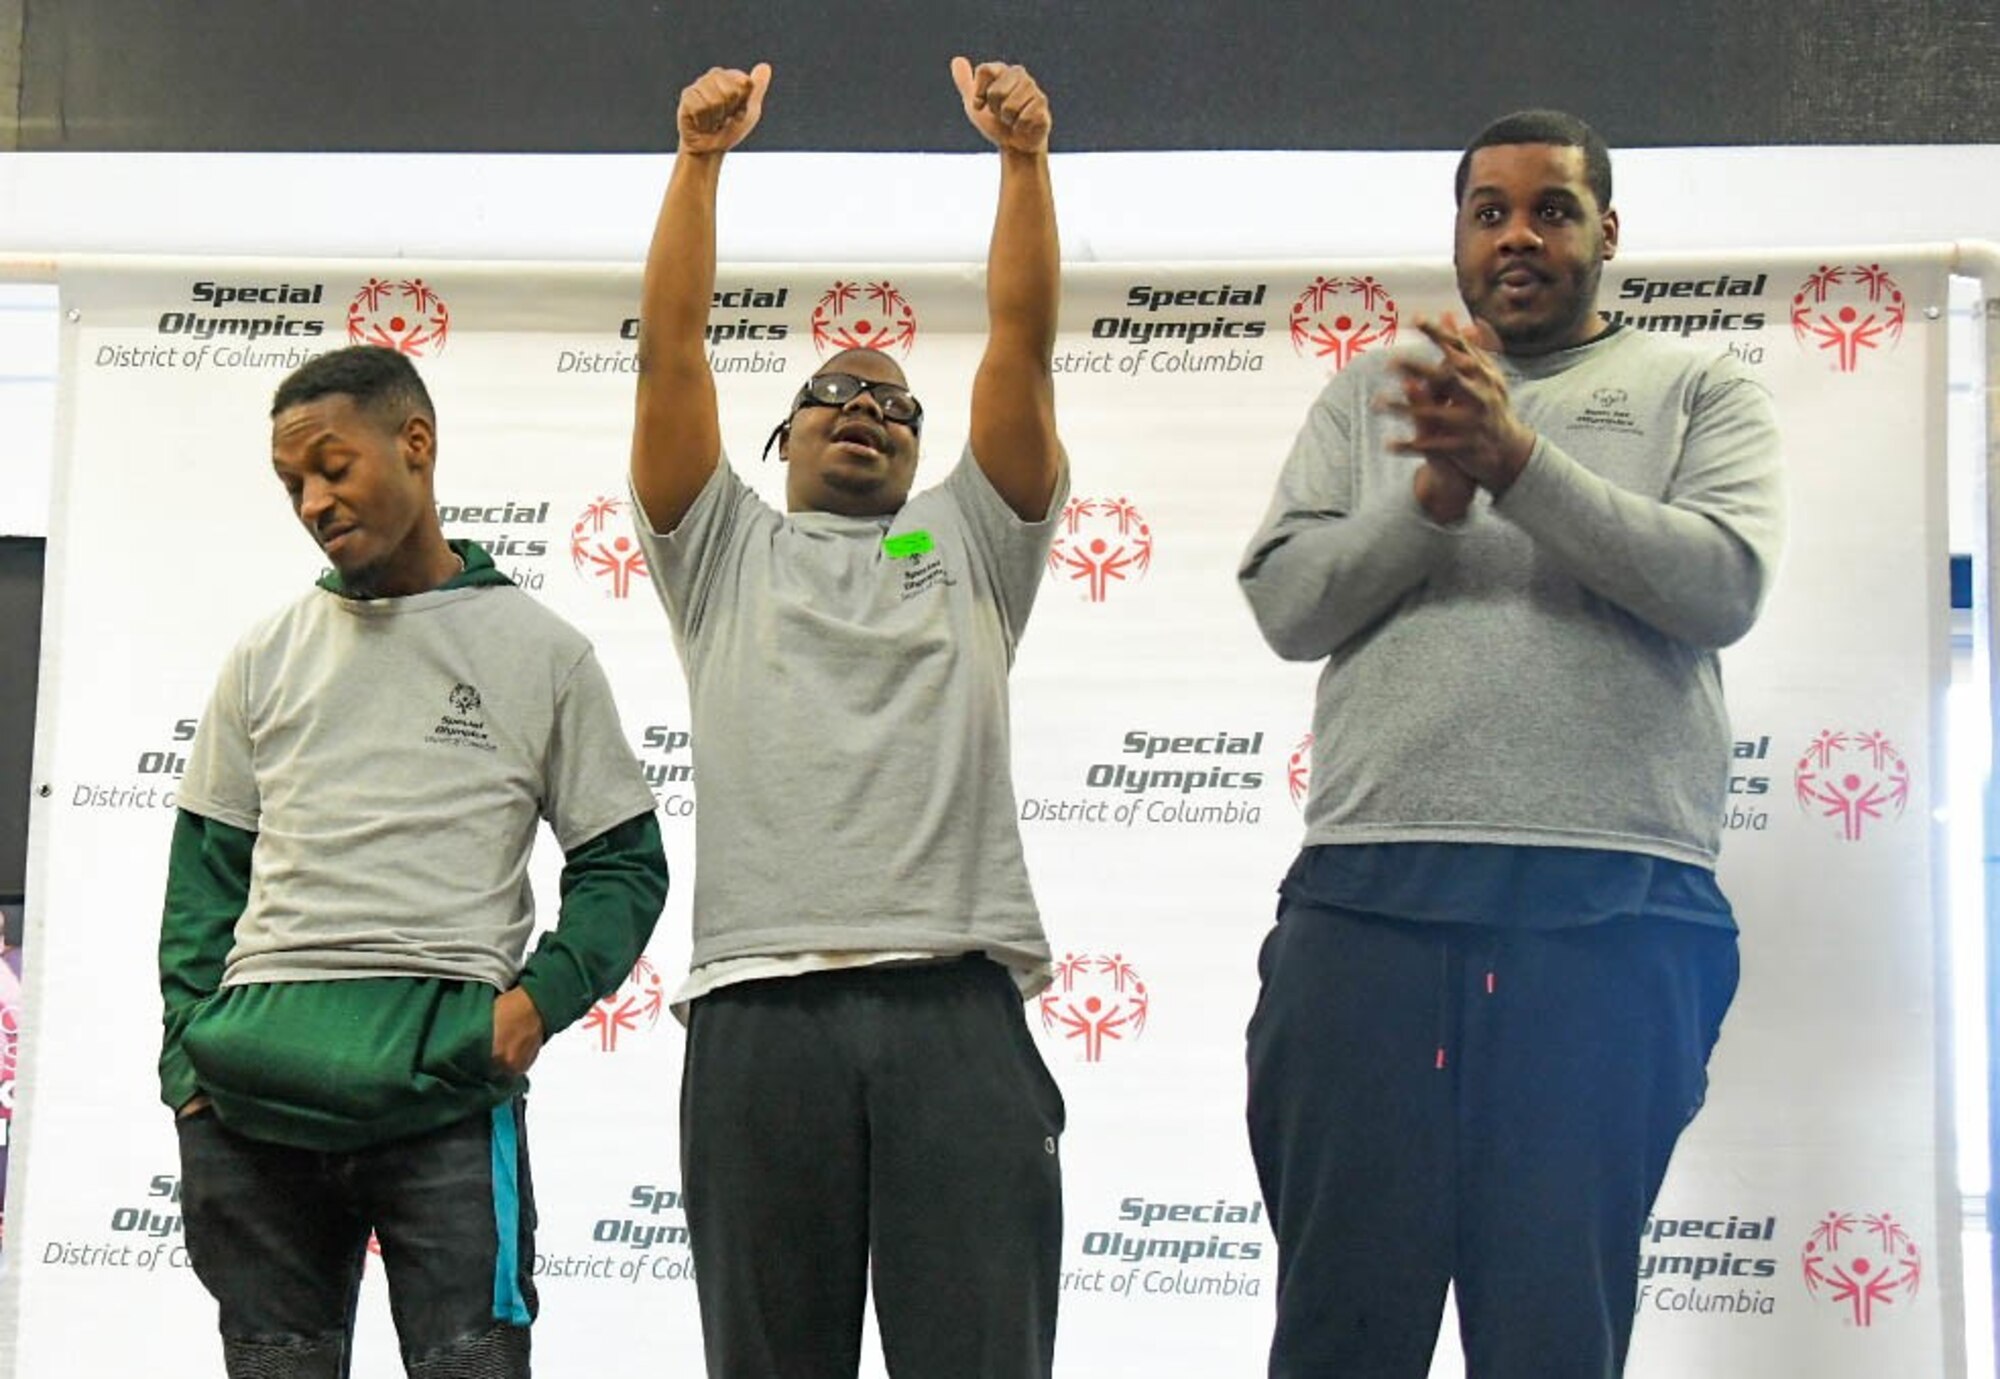 Lenny Haynes, Ellery Roberts, and Cervante Givens, participants on the Special Olympics DC Adult Bowling Tournament, celebrate their success during the tournaments award ceremony in Hyattsville, Md., March 4, 2020. The Special Olympics DC holds a 3-day-long adult bowling tournament each year for disabled adults. (U.S. Air Force photo/Senior Airman Jalene A. Brooks)